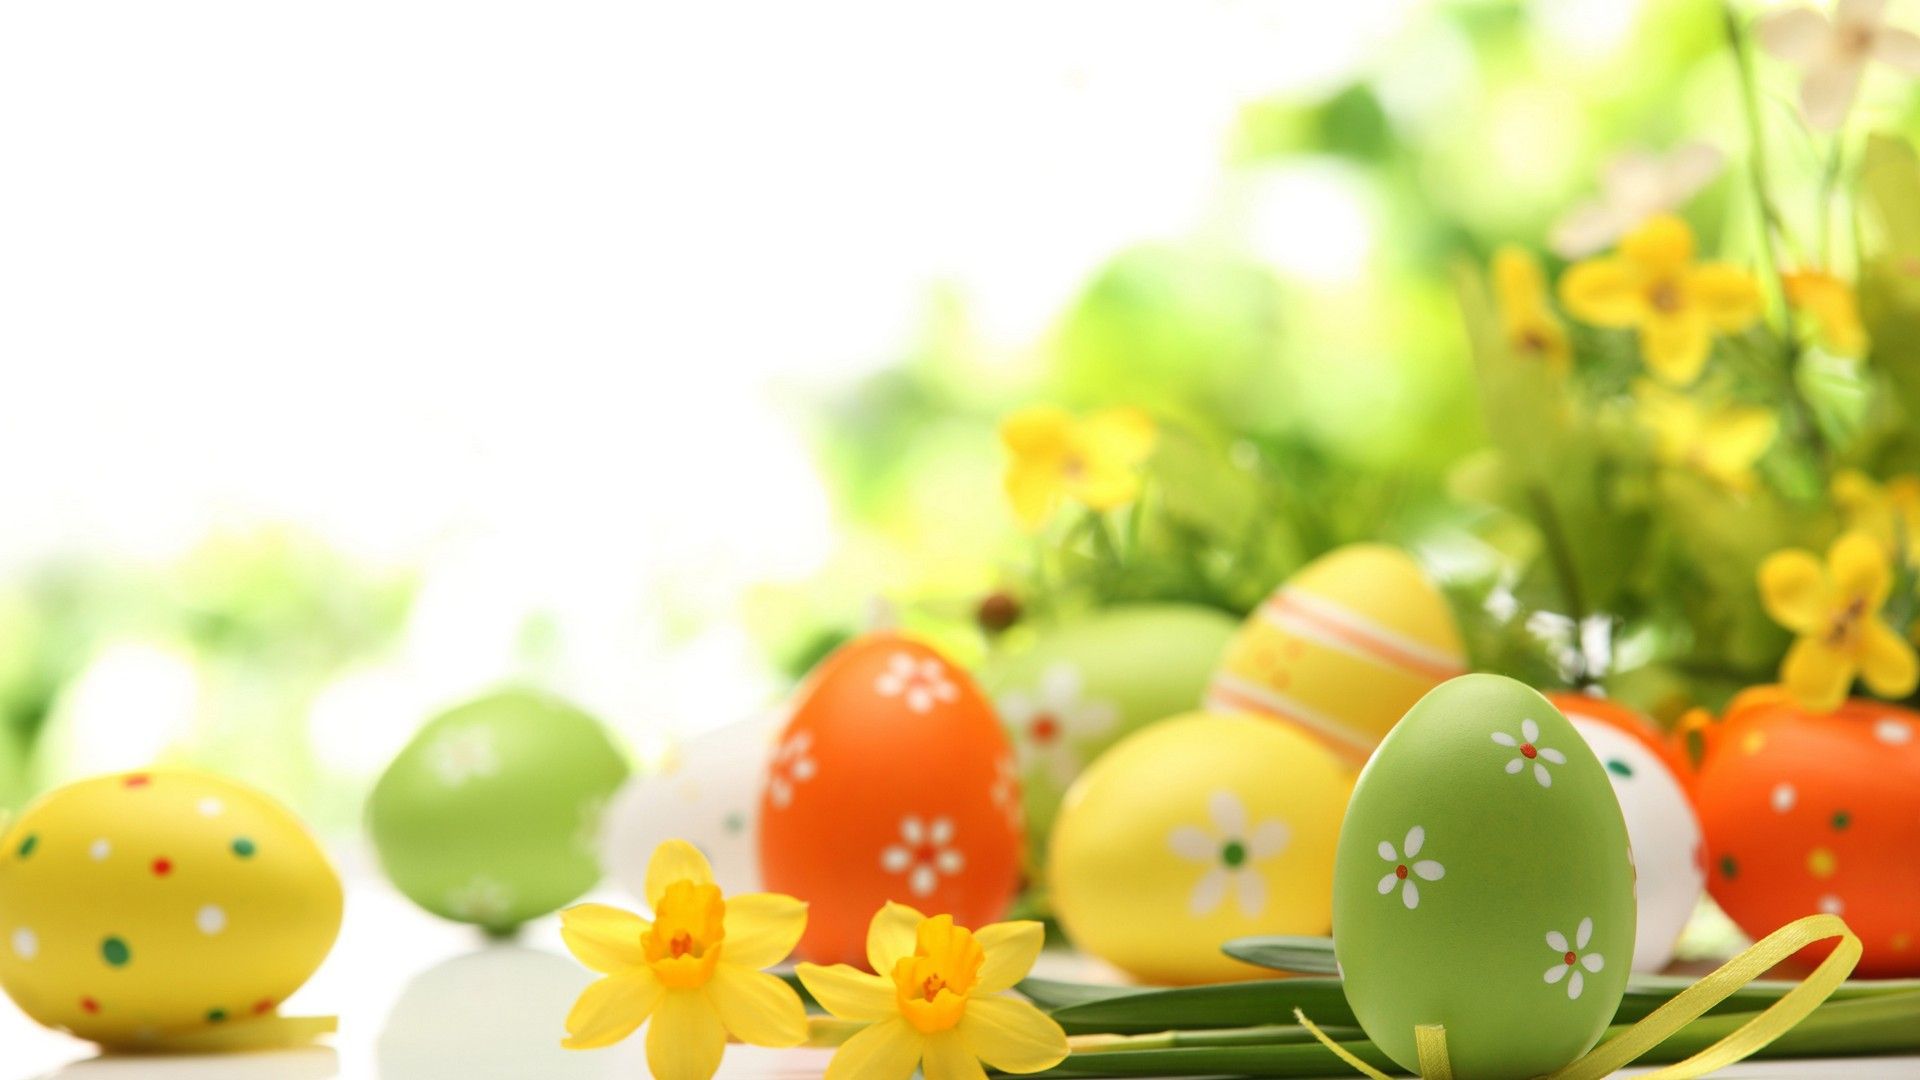 Yellow Theme Desktop Background HD. Best Wallpaper HD. Easter wallpaper, Easter egg decorating, Coloring easter eggs